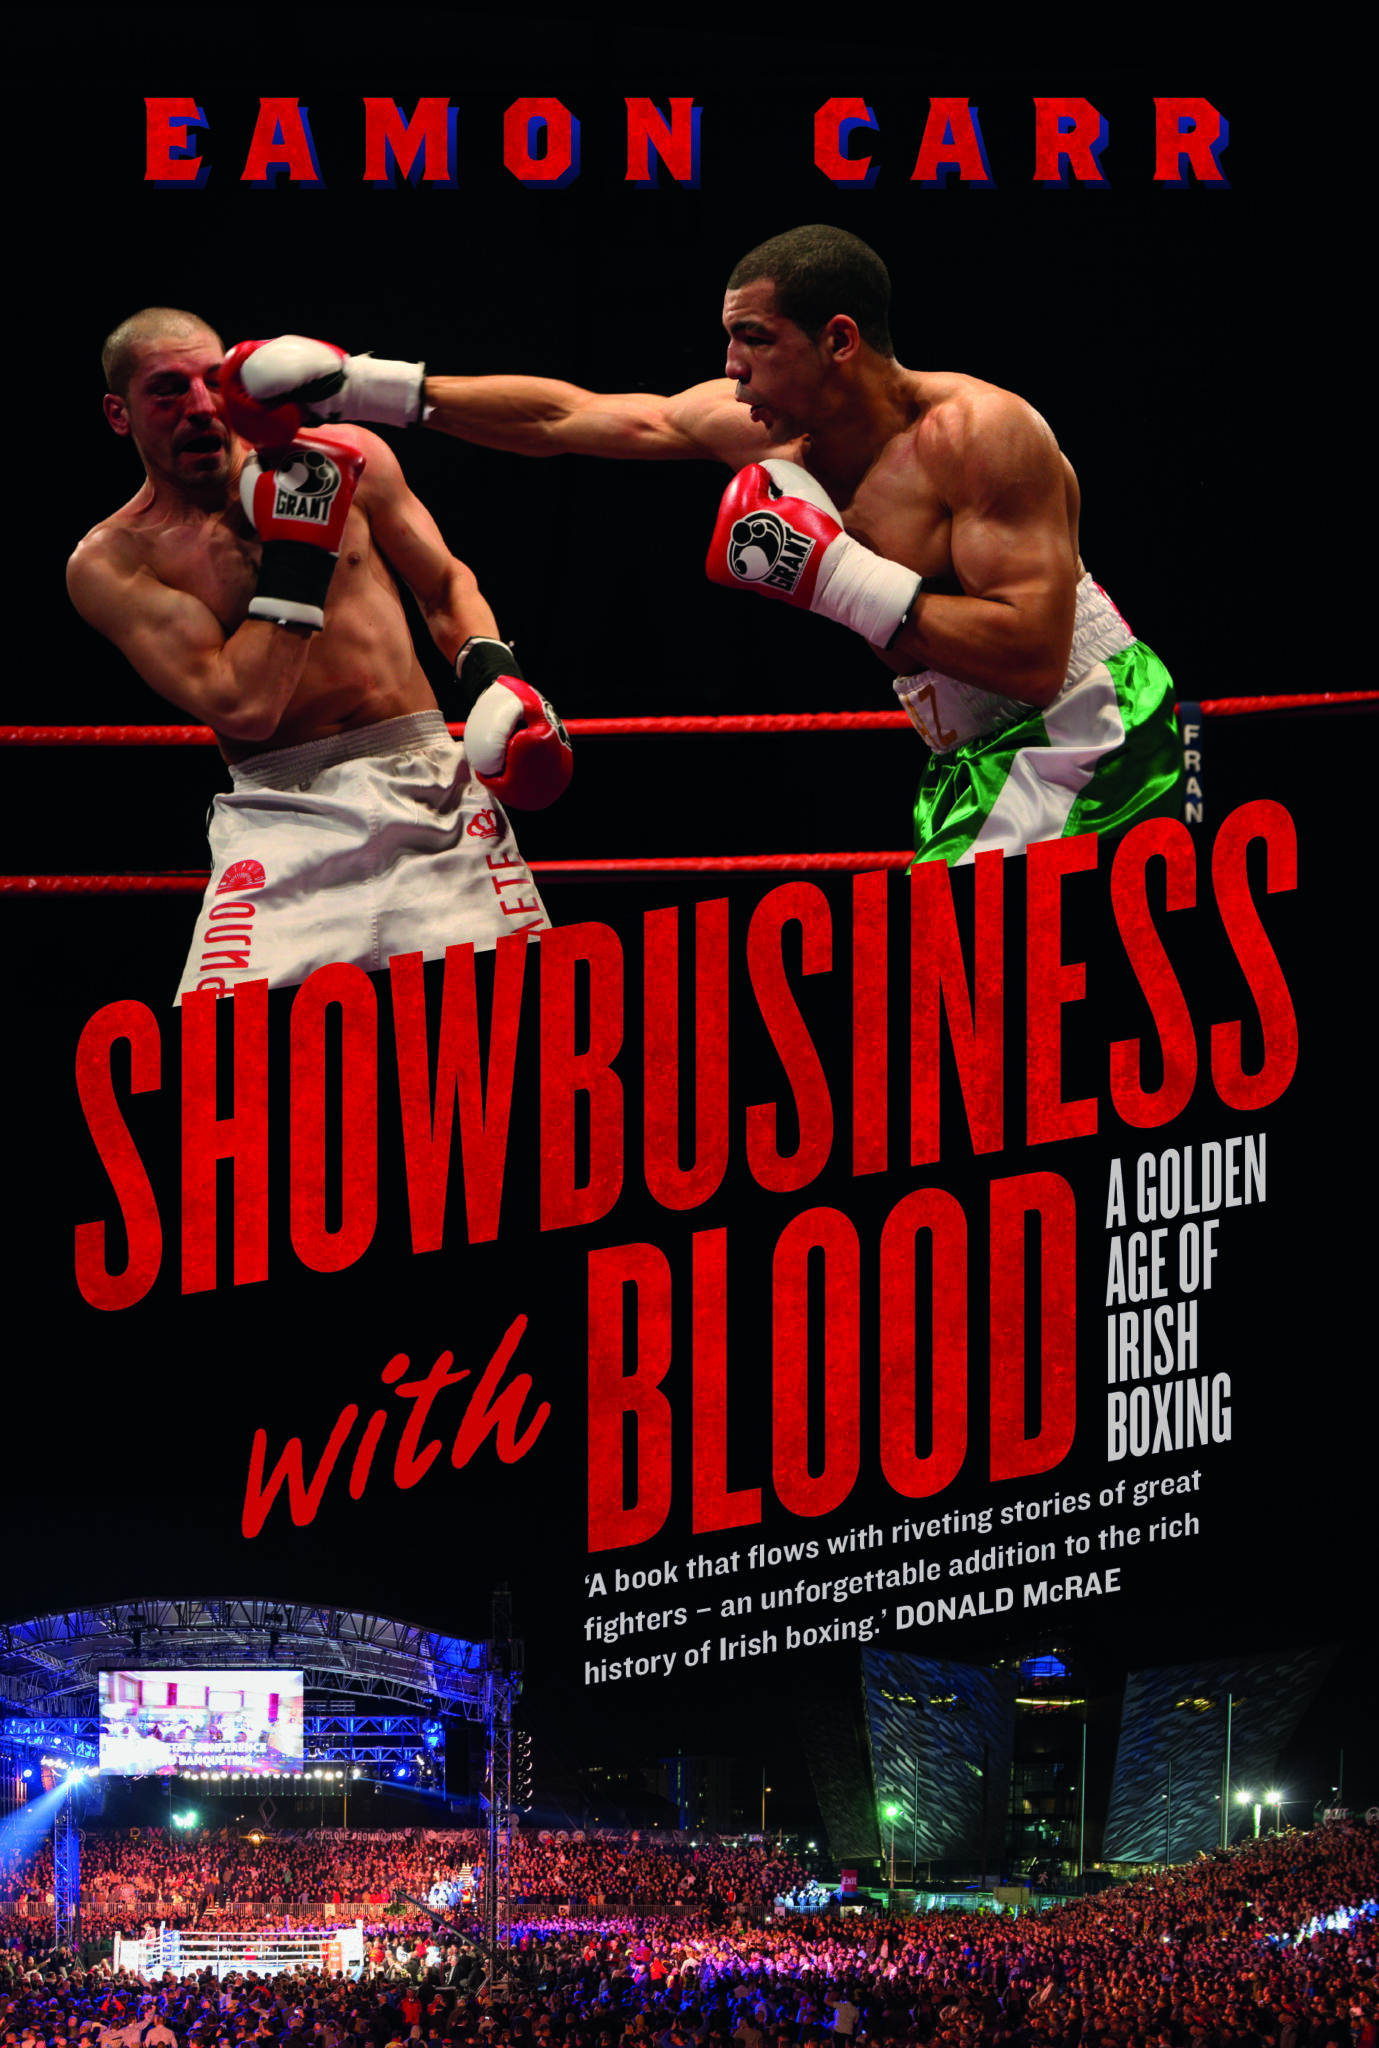 Showbusiness With Blood | Eamon Carr | Charlie Byrne's